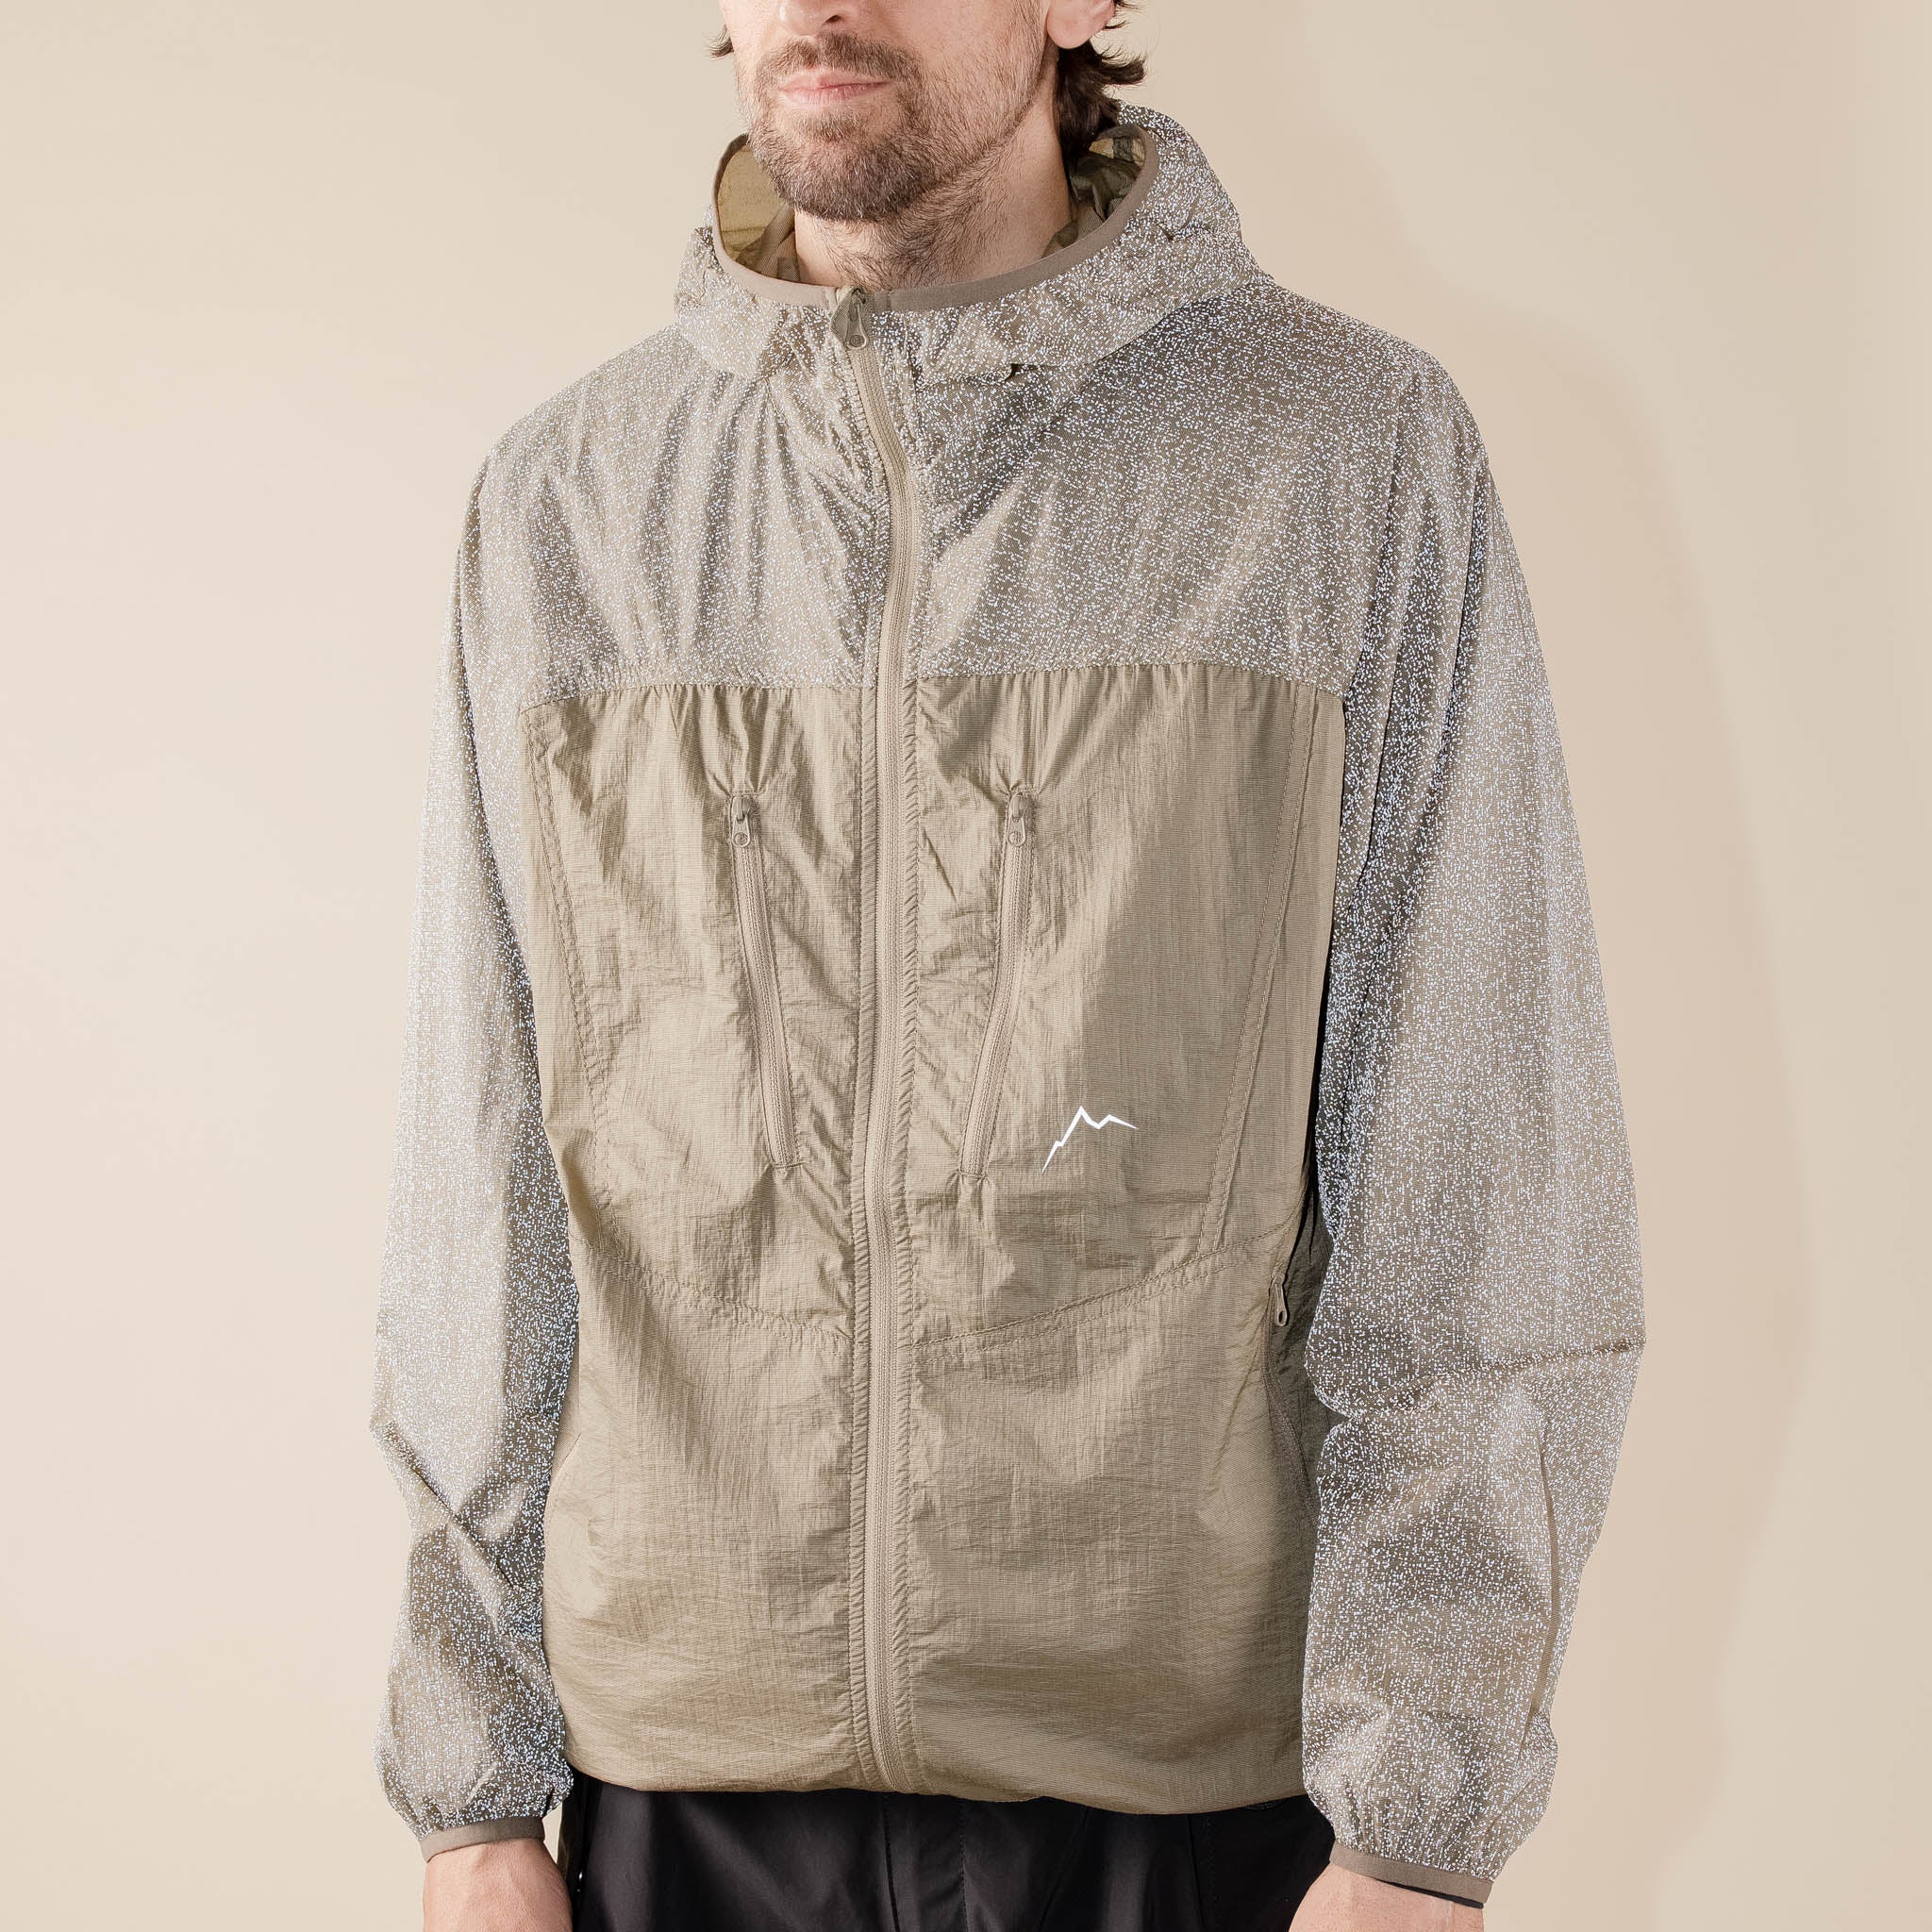 CAYL "Climb As You Love" - Reflective Wind Jacket - Sand Brown